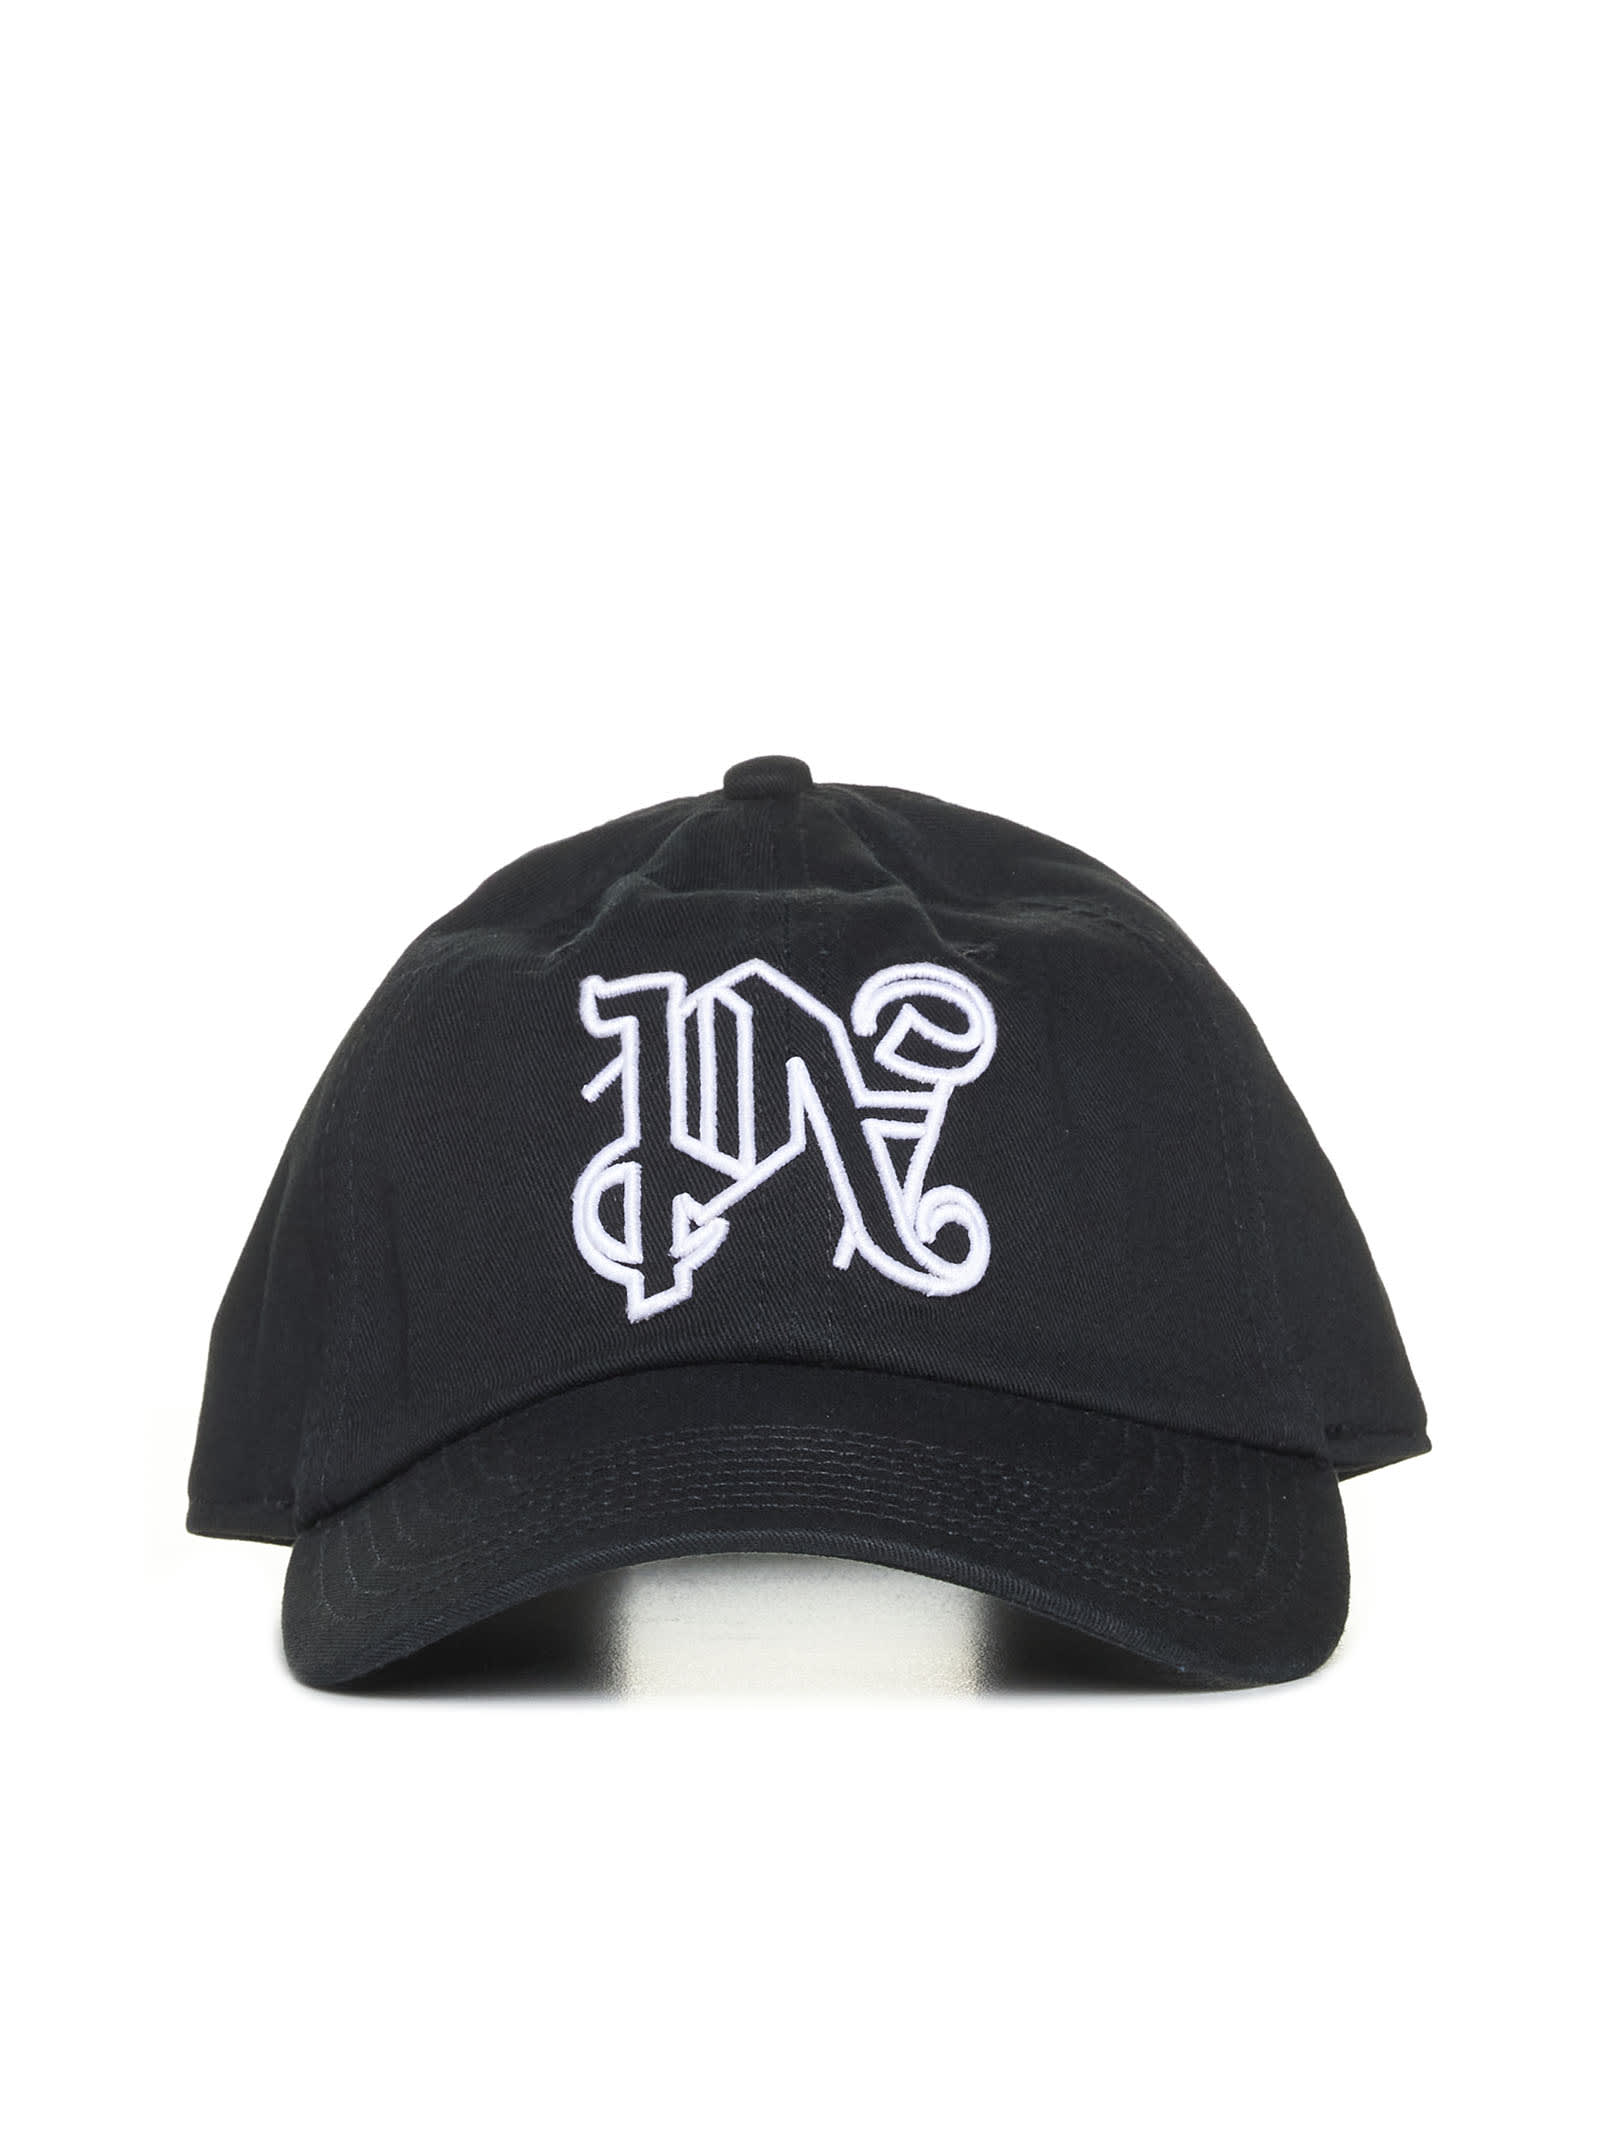 Palm Angels Hat In Black